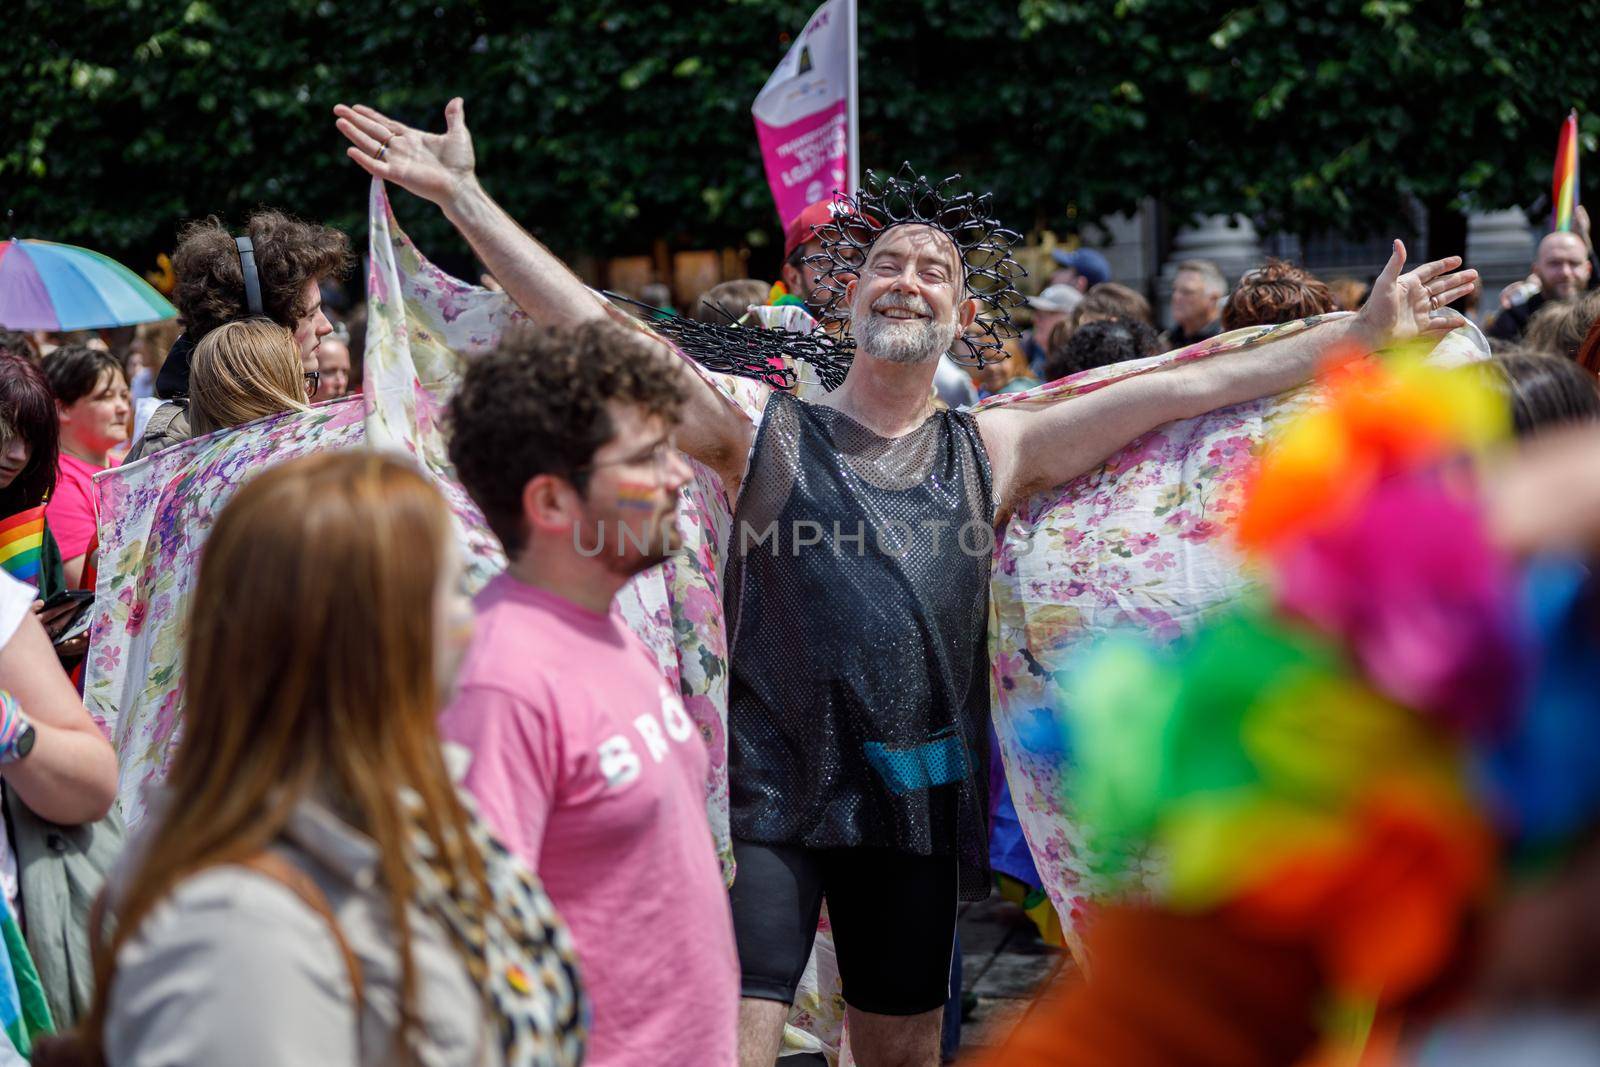 Dublin, Ireland, June 25th 2022. Ireland pride 2022 parade with people walking on one of the main city street by Yaroslav_astakhov